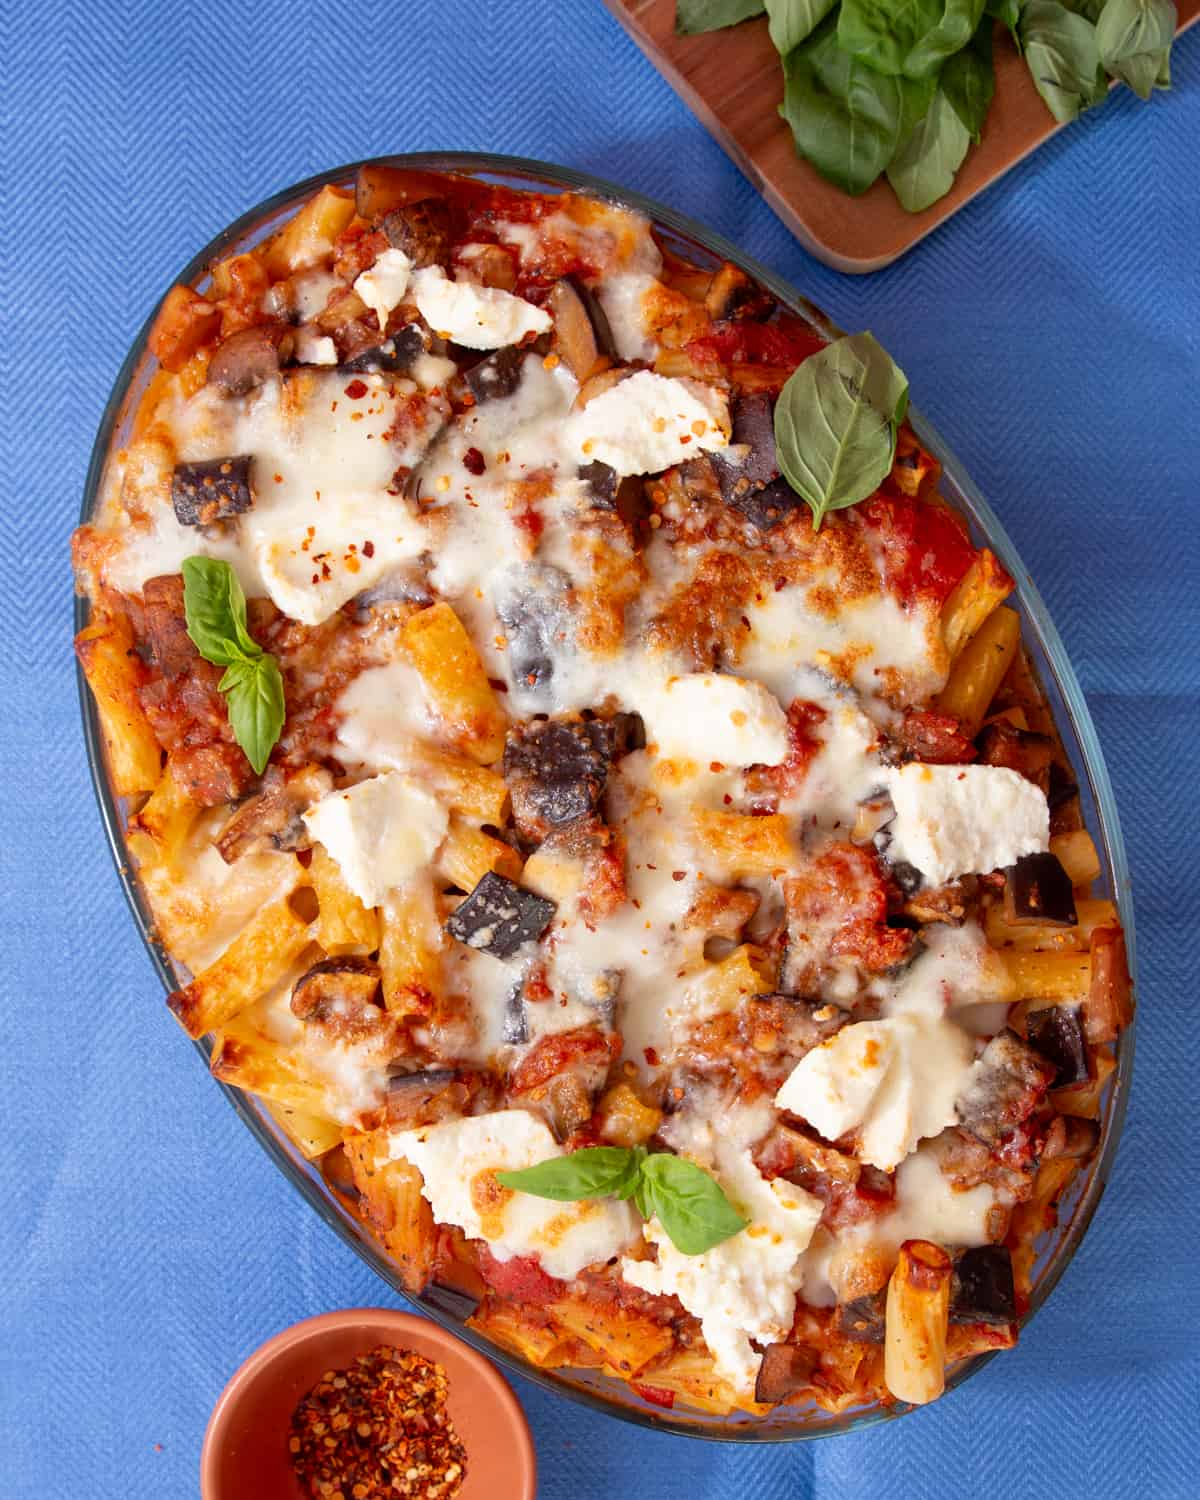 An oval dish filled with baked rigatoni pasta and a cheesy browned topping garnished with fresh basil on a blue background.